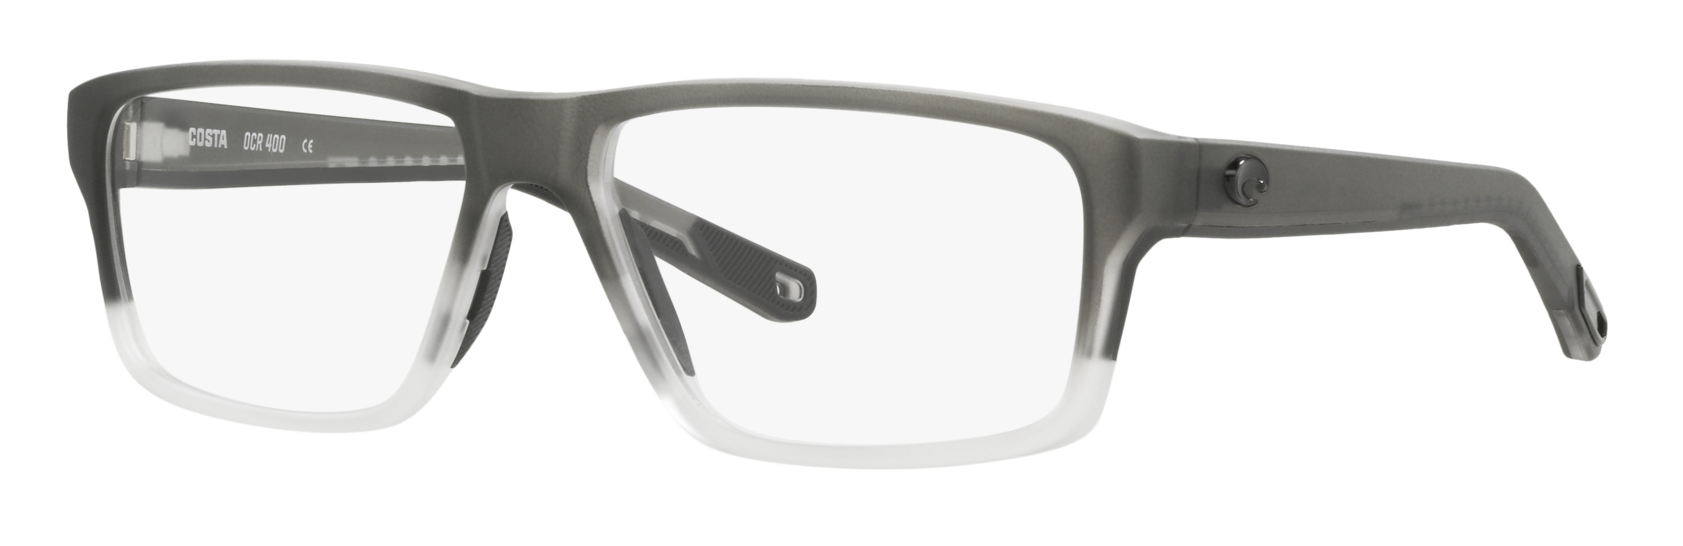 New Costa Glasses the Ocean Ridge 400 in matte gray with clear lenses.